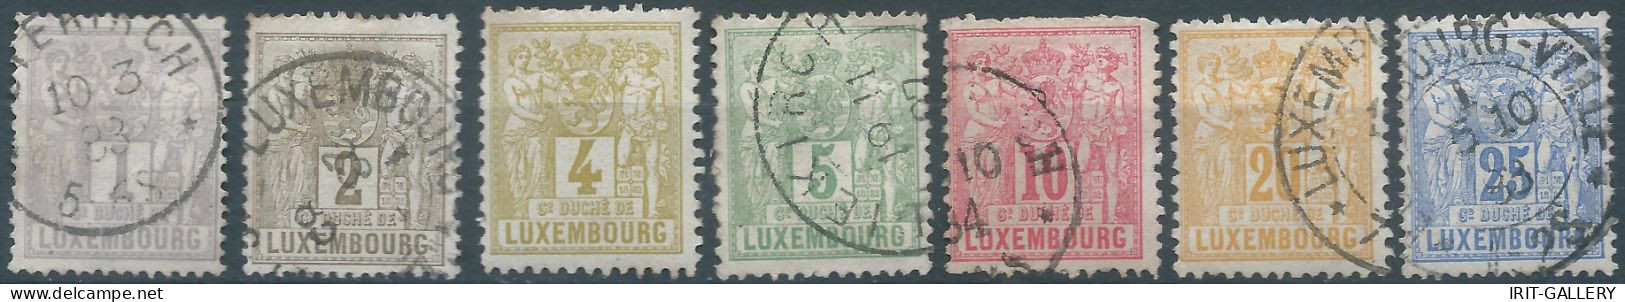 Lussemburgo - Luxembourg - 1882 Definitive Issue,Obliterated - 1882 Allegorie